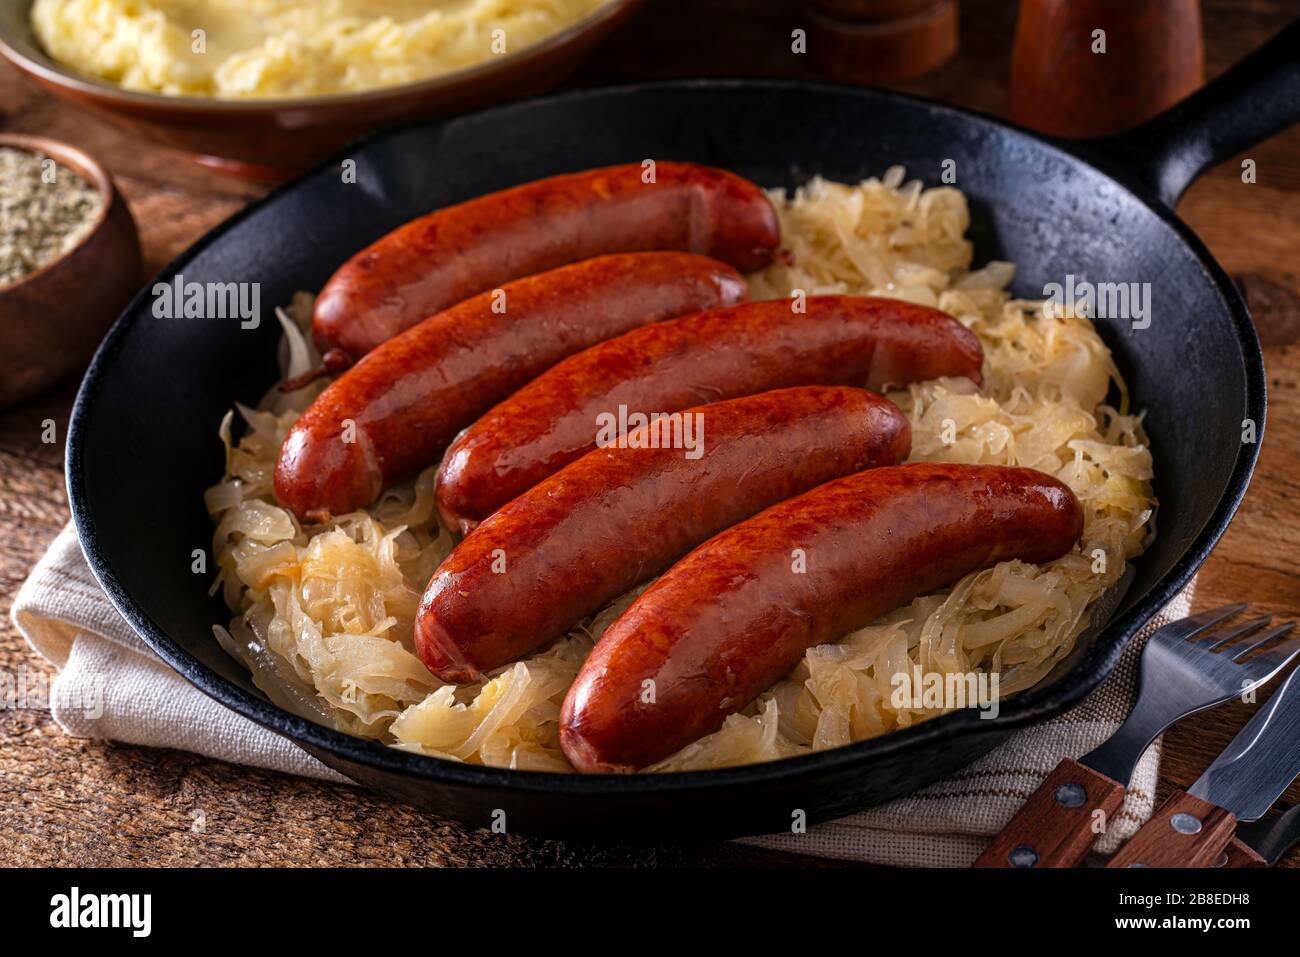 A skillet of delicious smoked sausage and sauerkraut. Stock Photo